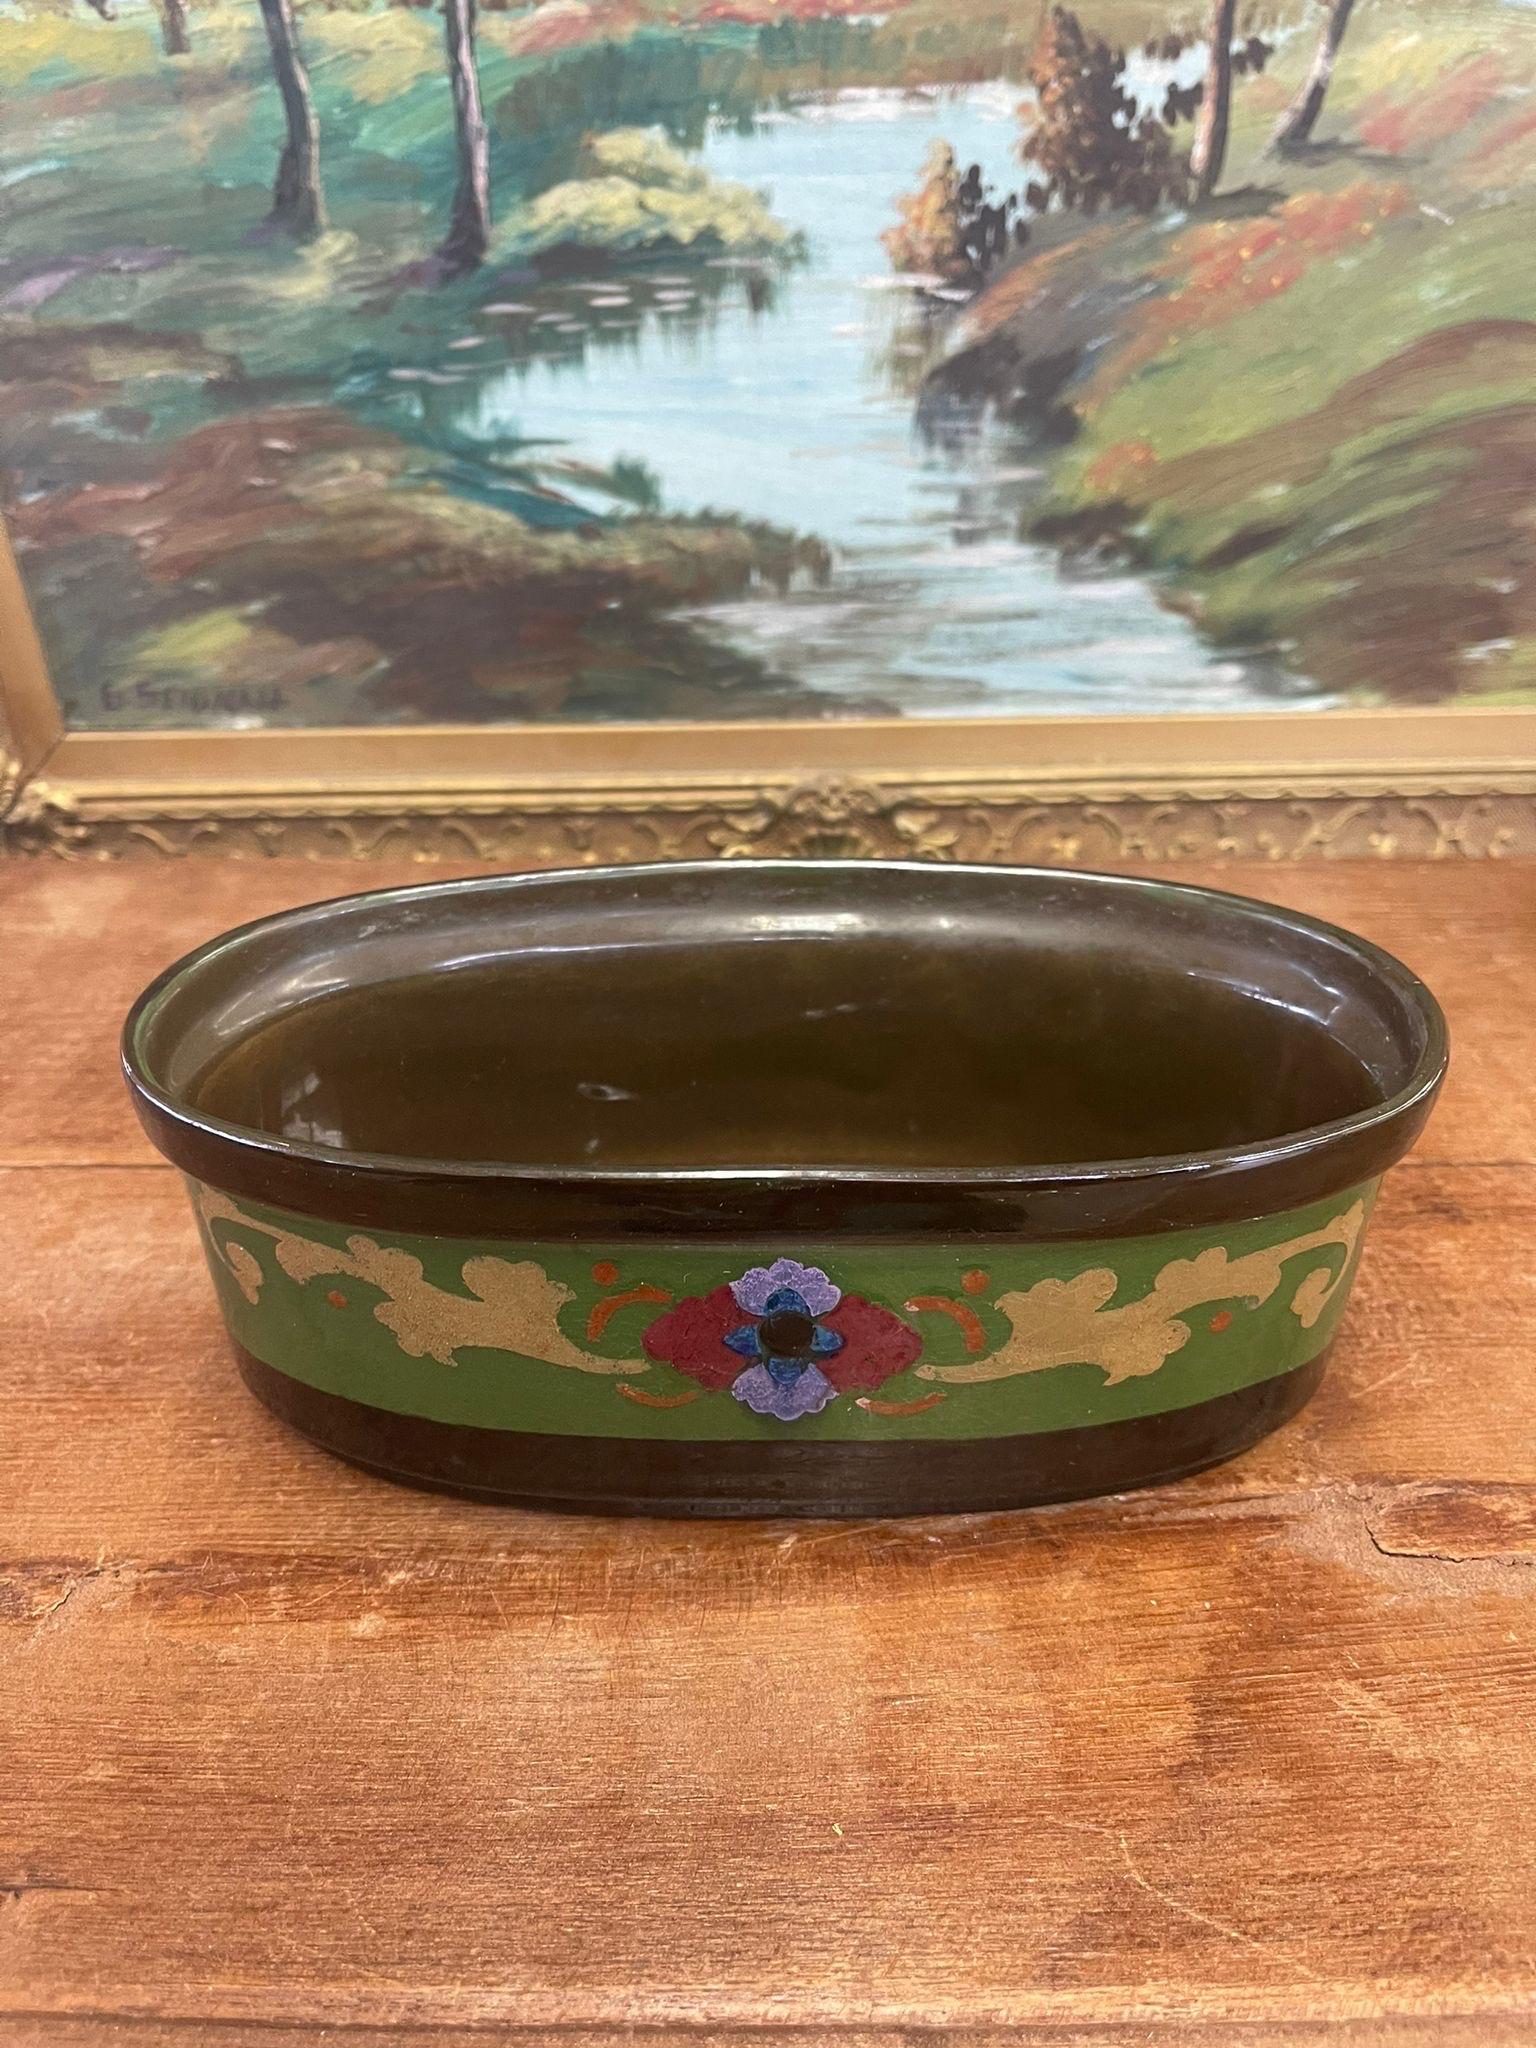 Traditional floral design atop this unique ceramic piece.Makers mark on the bottom stating that was made in Holland. Made in the Early 1900s. Hand Painted. Vintage Condition Consistent with Age as Pictured.

Dimensions. 9 W ; 4 1/2 D ; 3 H